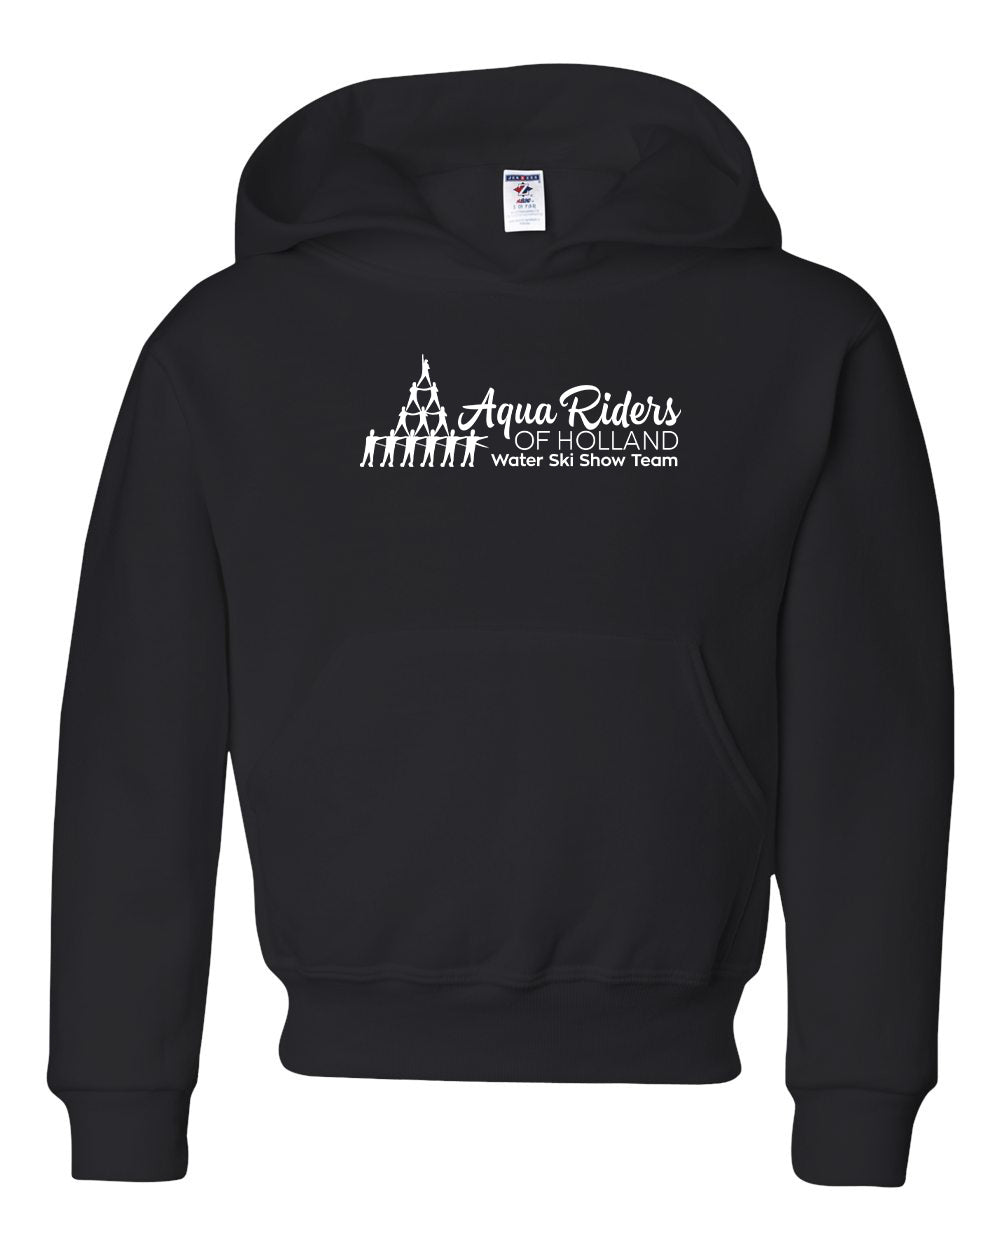 Aqua Riders - Youth Hoodie - 996YR (color options available)